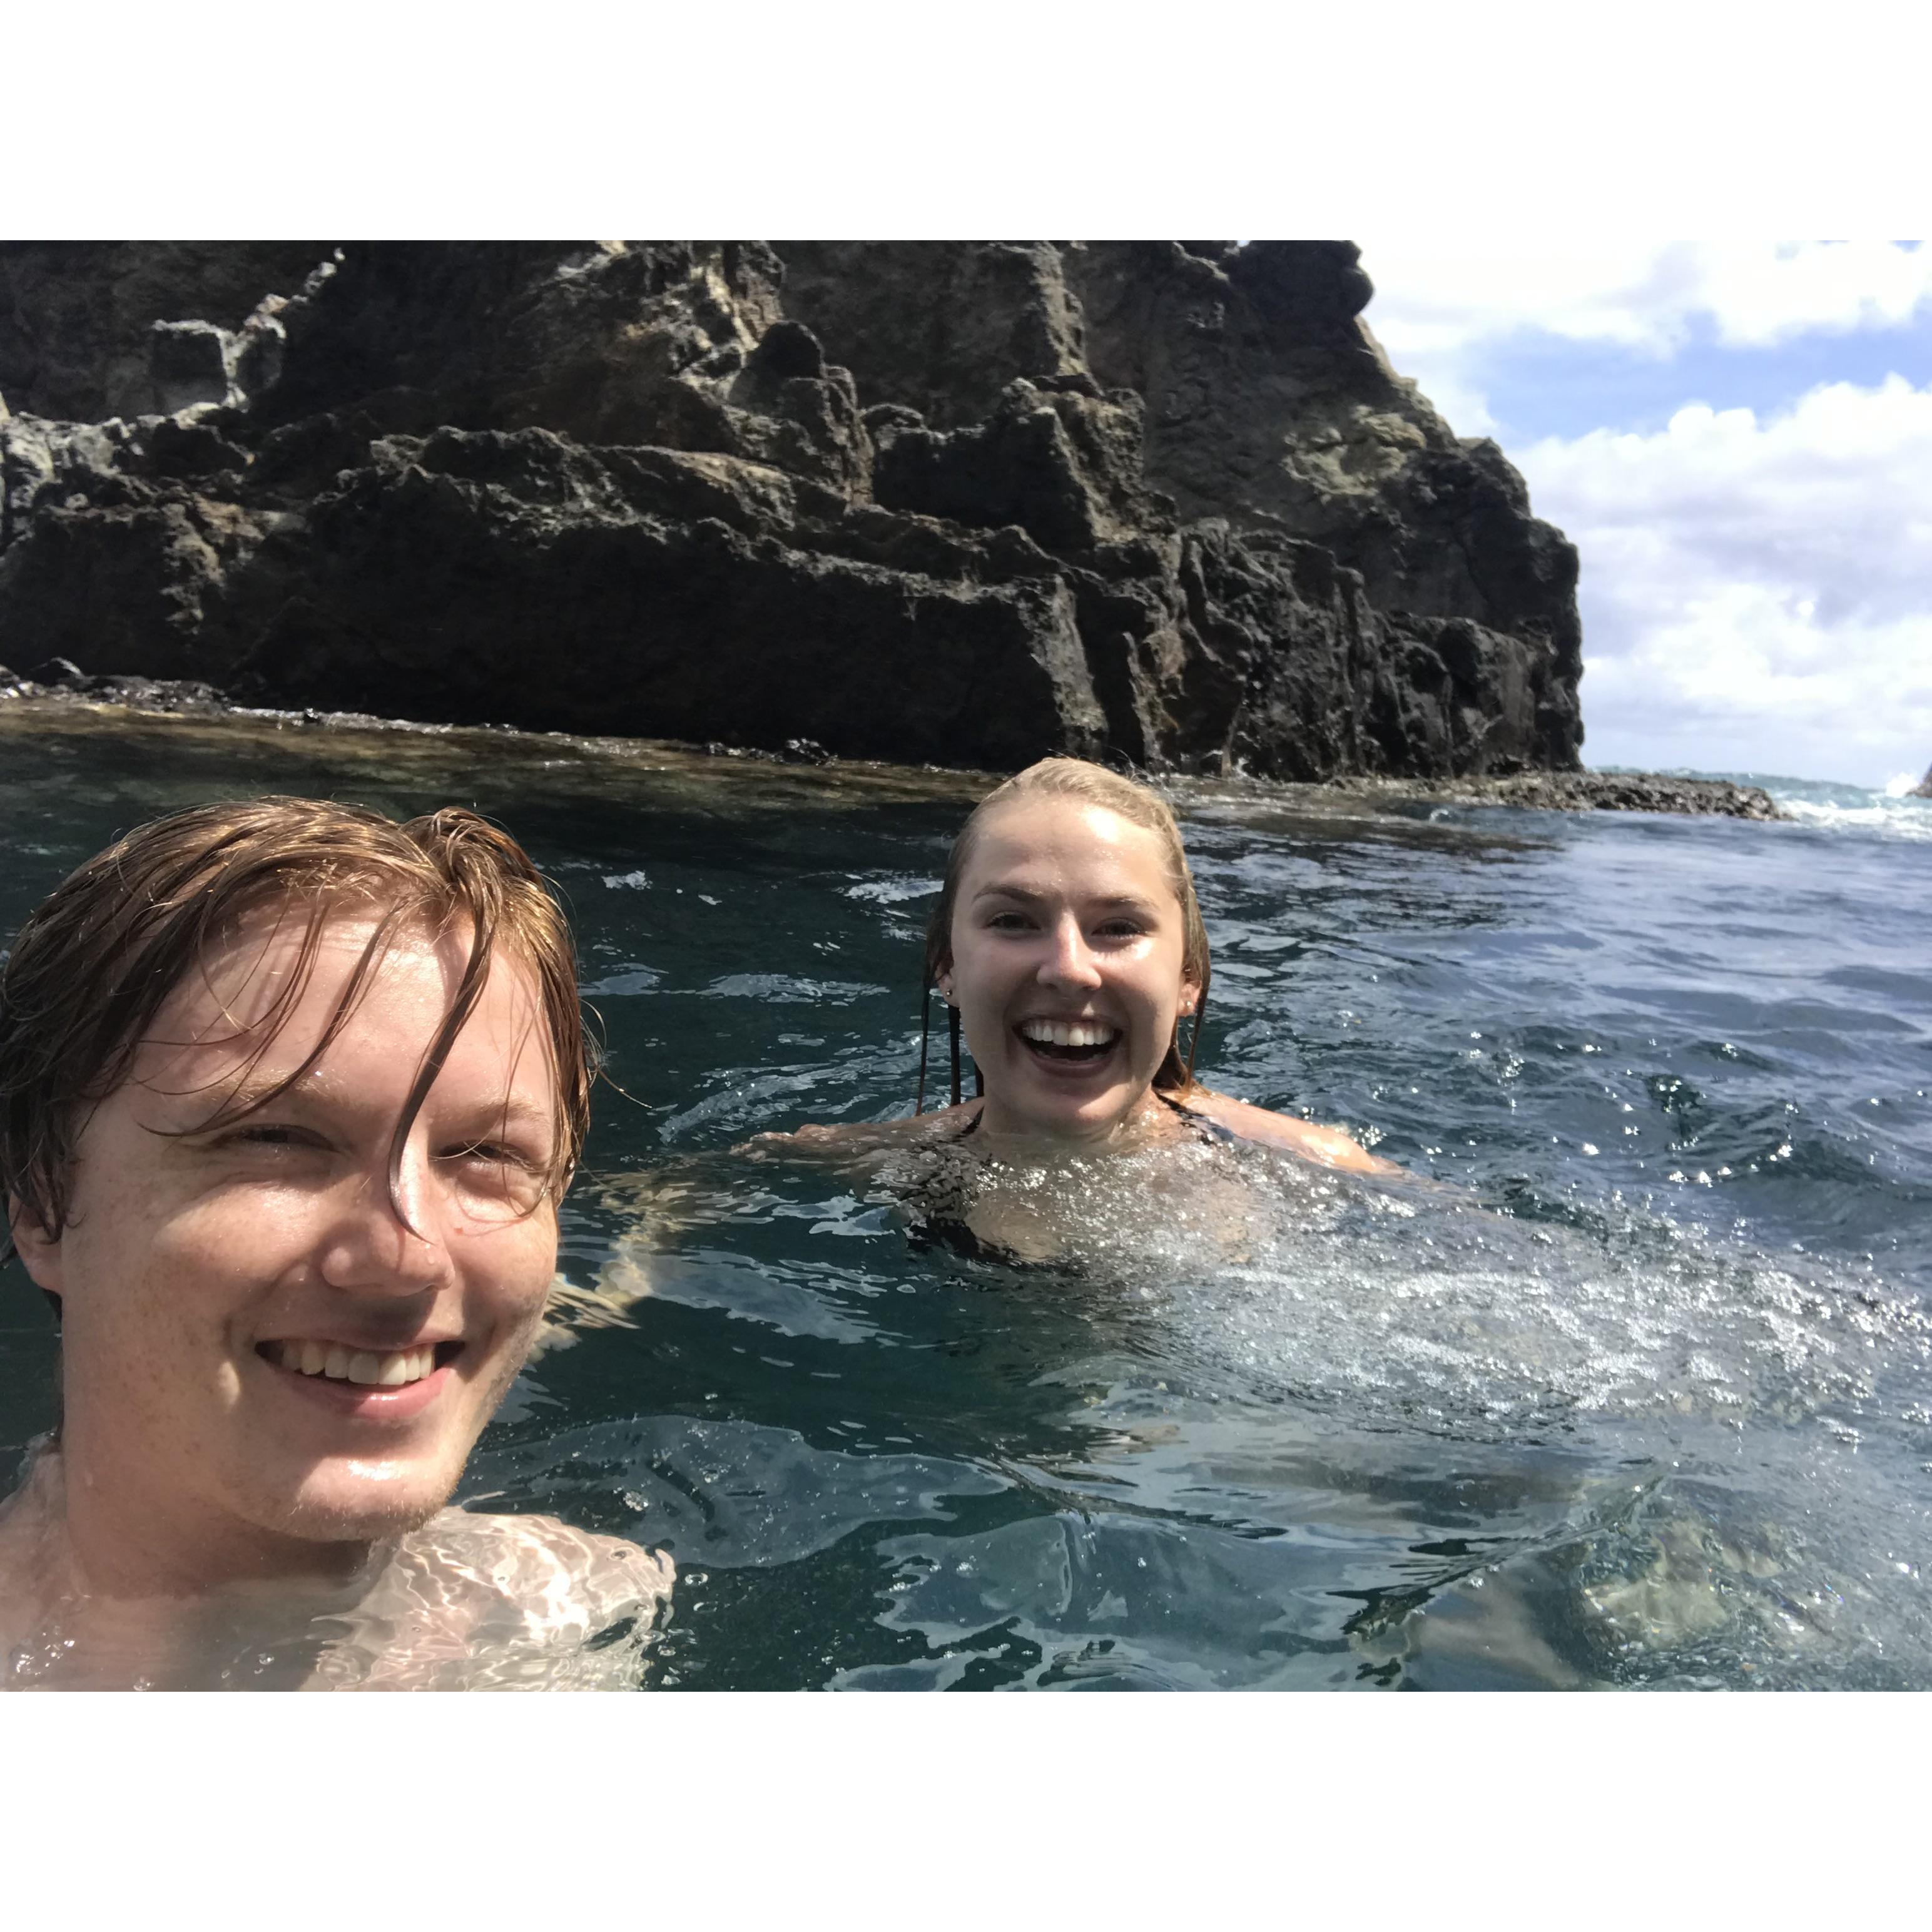 Cliff diving at the Mokes Islands in Oahu. We had to ocean kayak to get to this great spot.